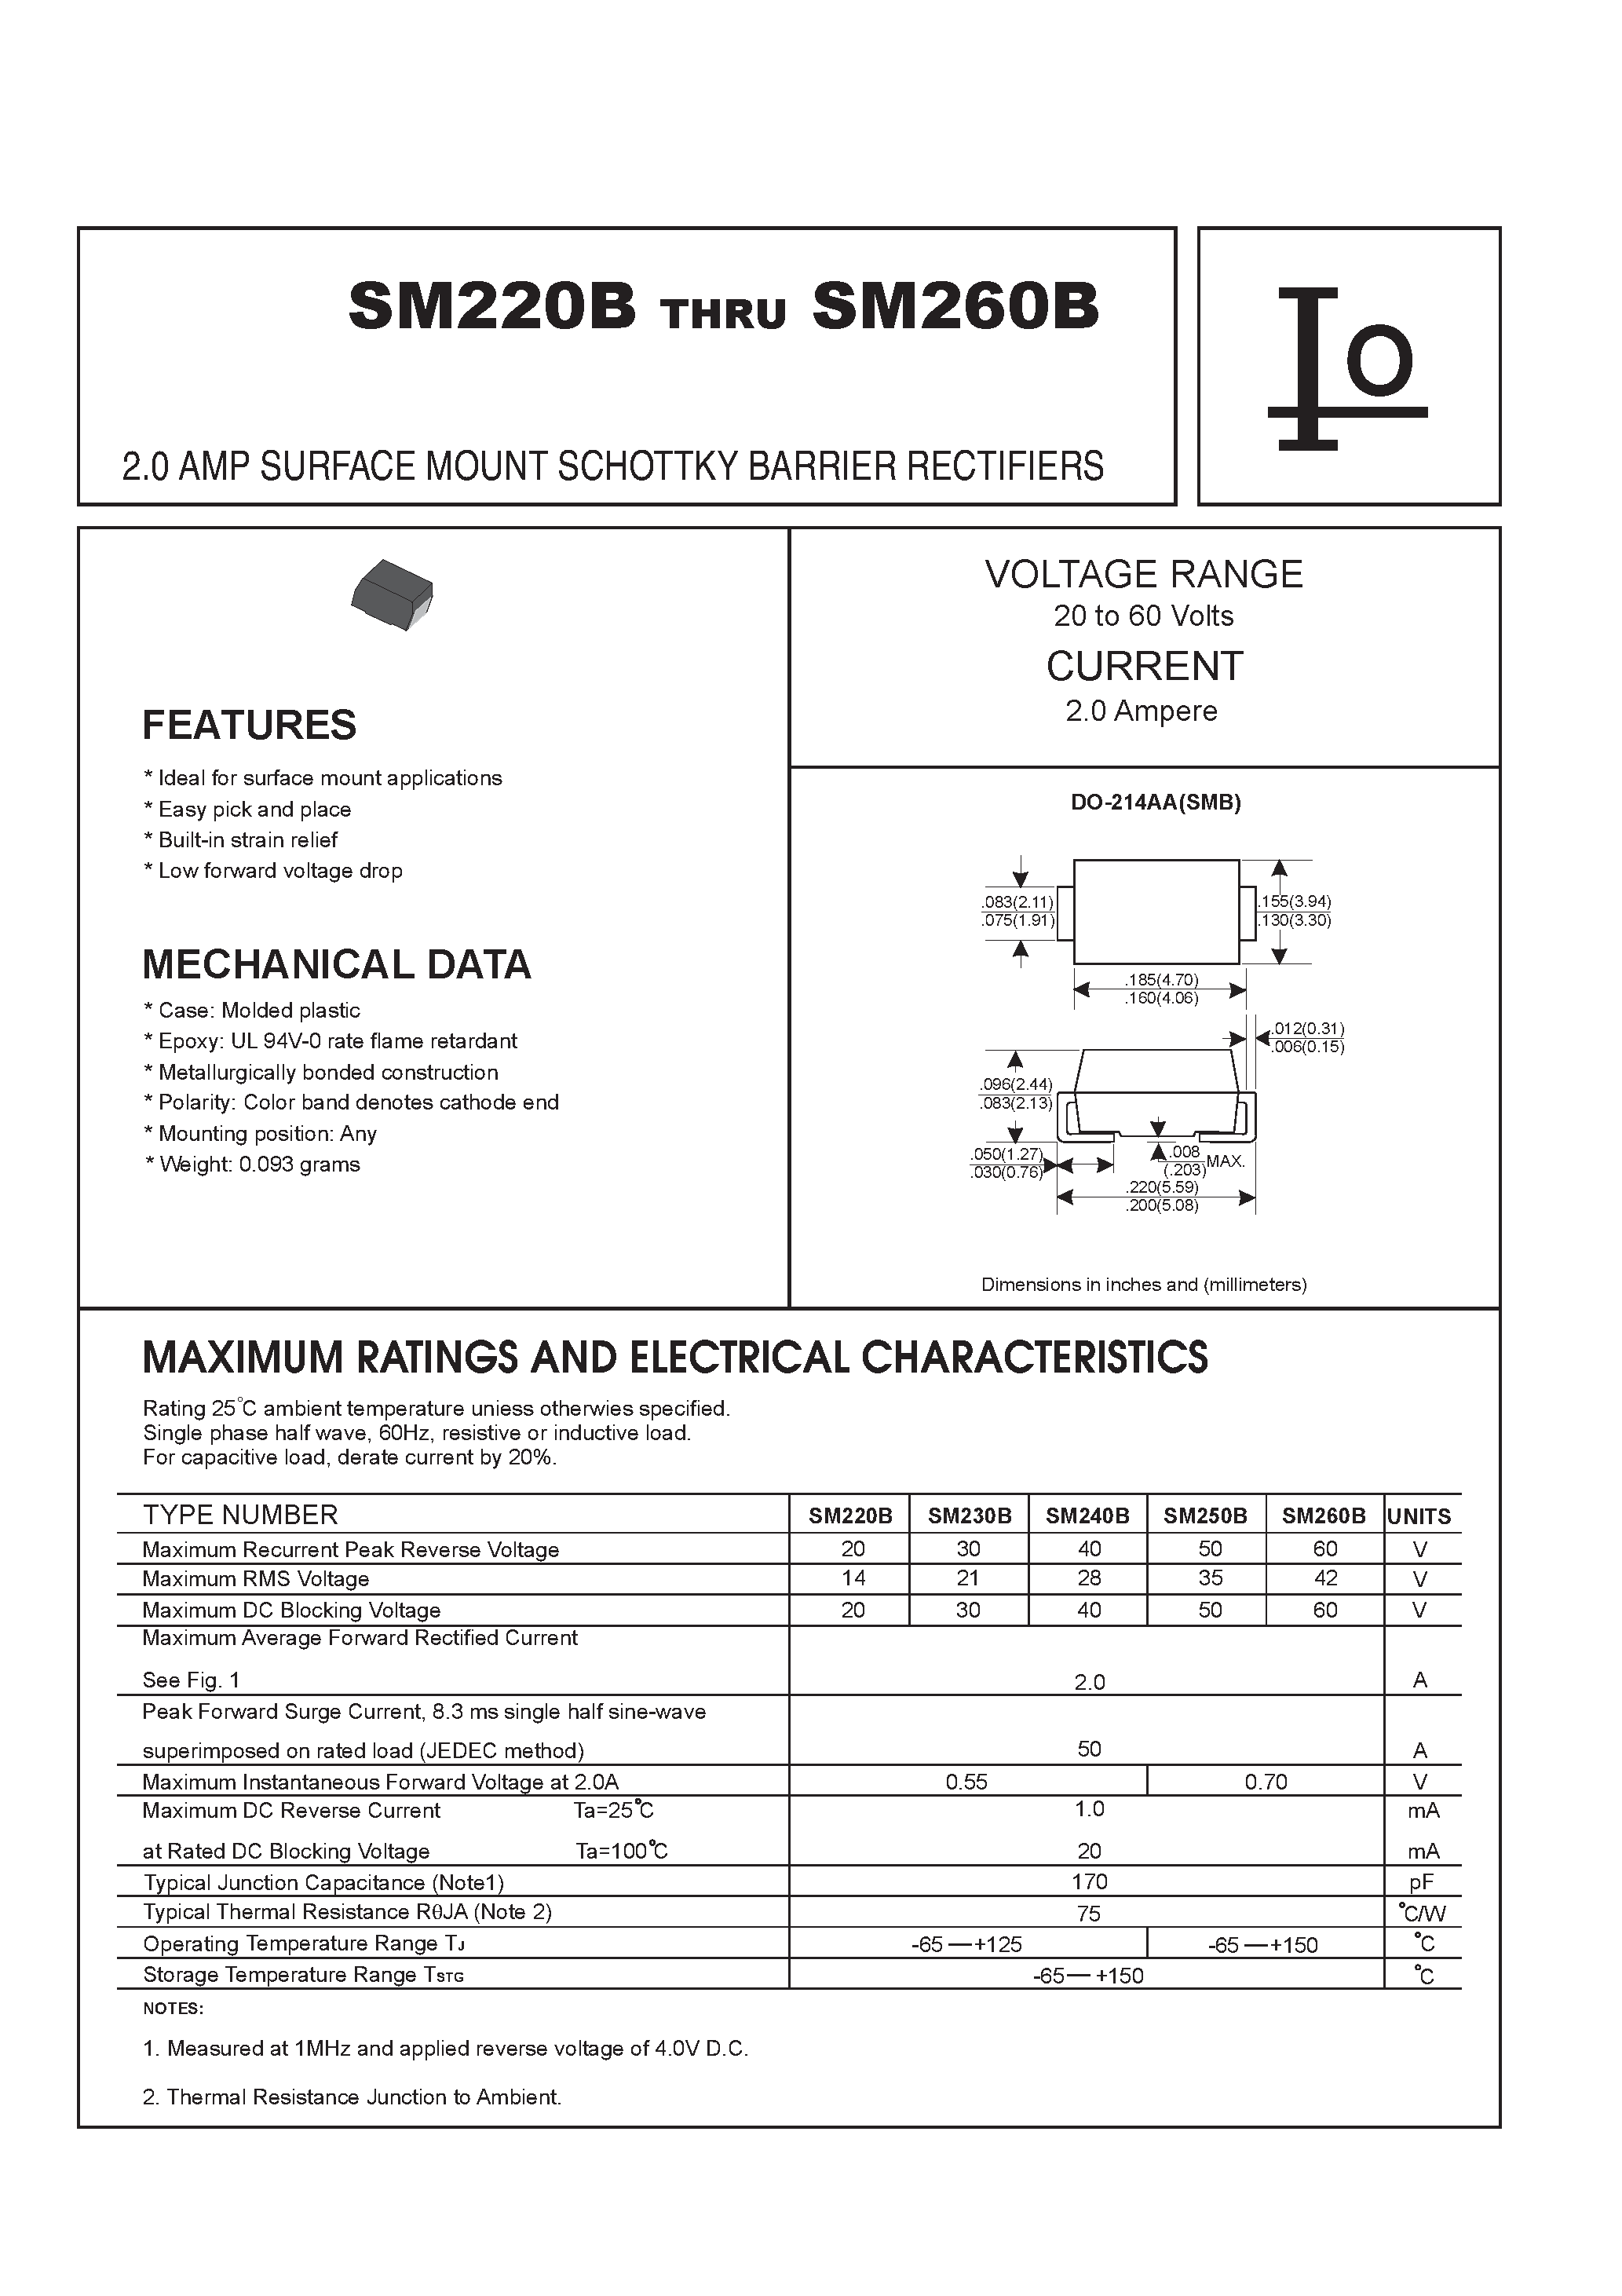 Datasheet SM240B - 2.0 AMP SURFACE MOUNT SCHOTTKY BARRIER RECTIFIERS page 1